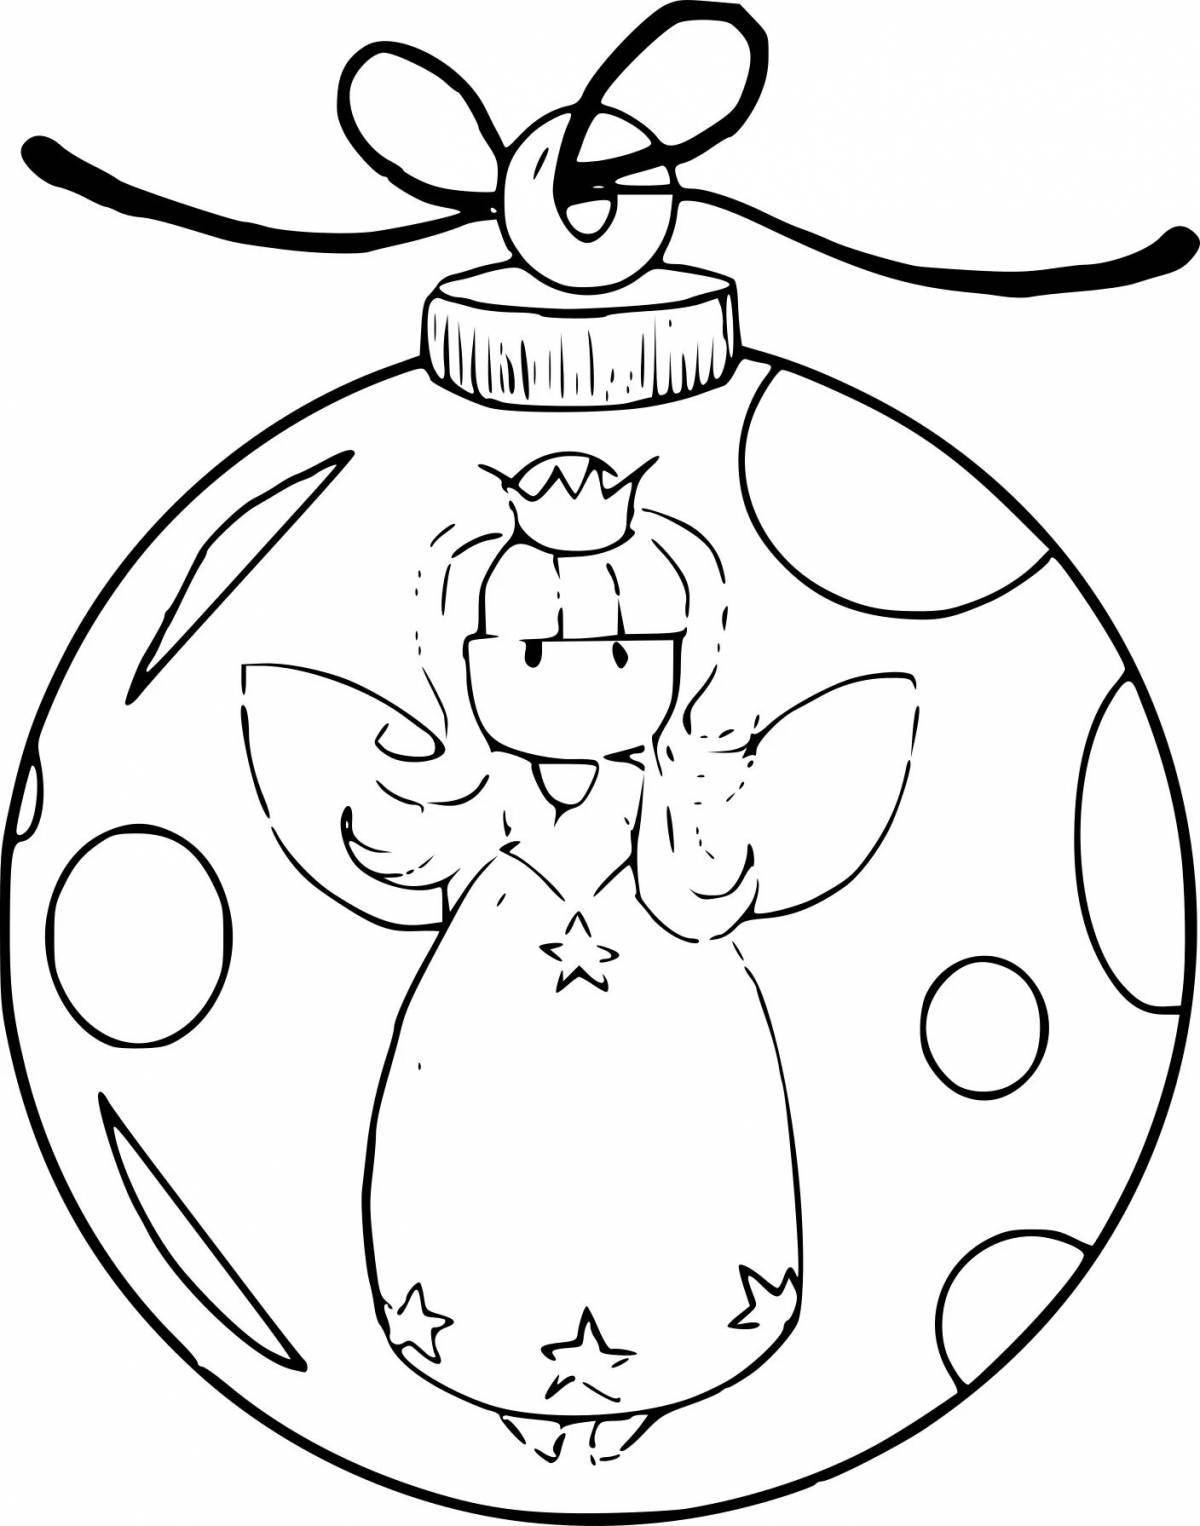 Sparkling Christmas angels coloring book